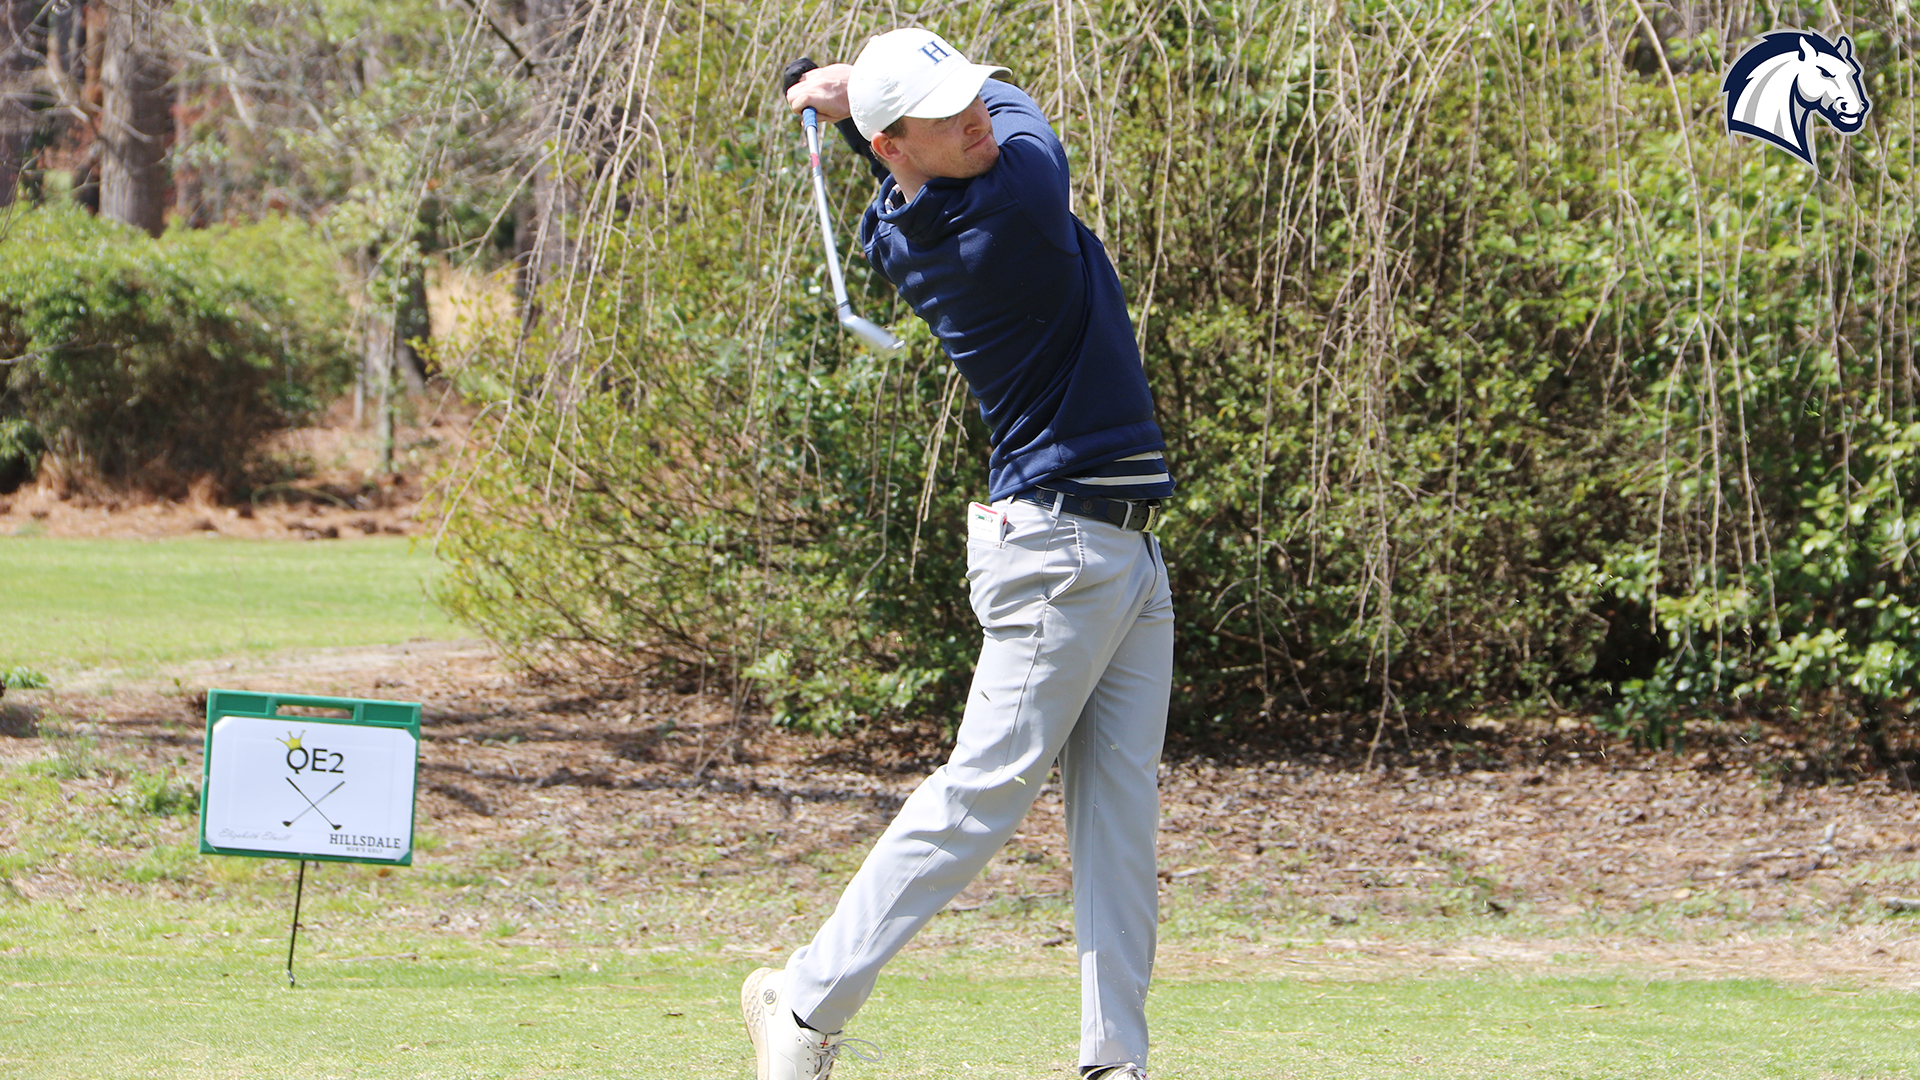 Monaghan ties for third; Chargers fifth at Panther Invitational